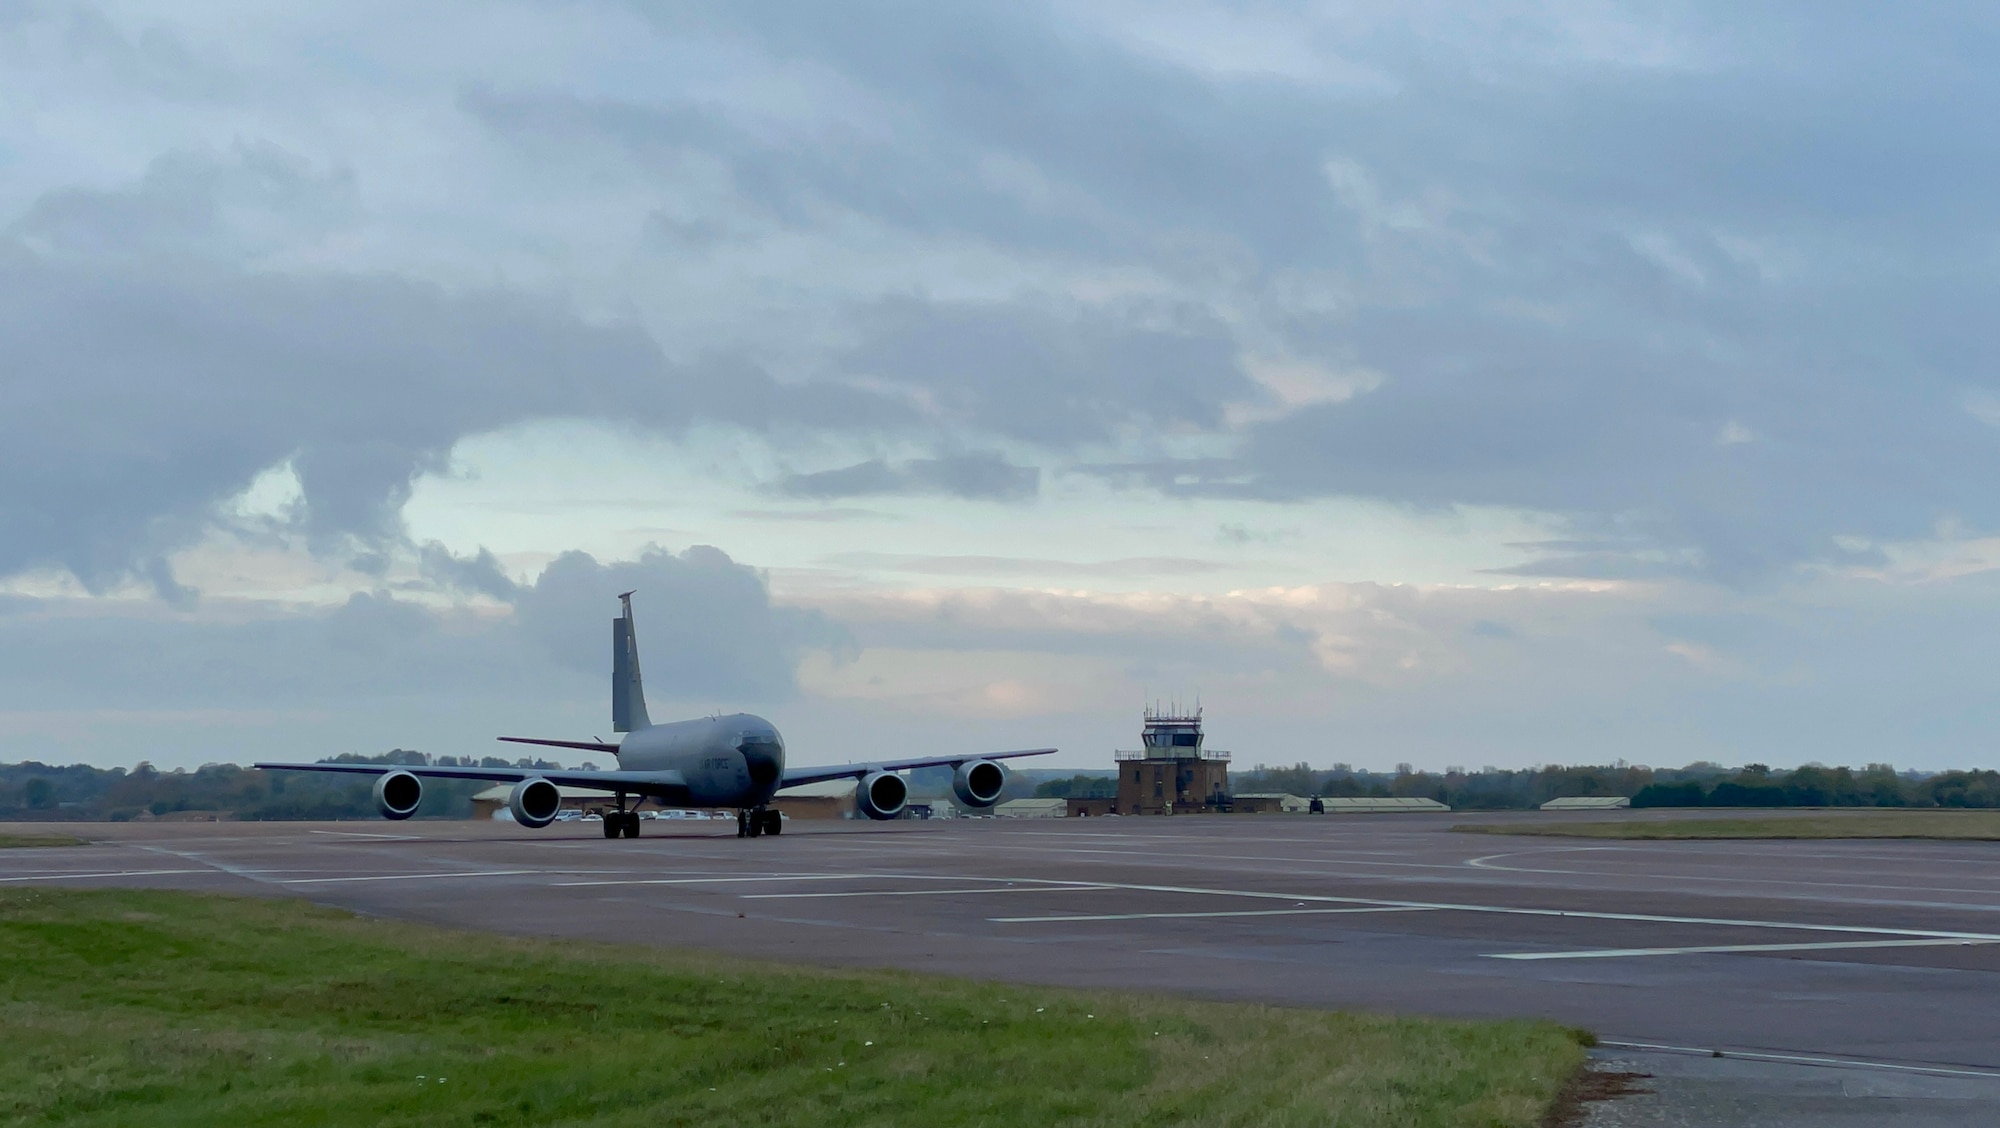 A U.S. Air Force KC-135 Stratotanker aircraft assigned to the 100th Air Refueling Wing, Royal Air Force Mildenhall, England, taxis along the flightline during exercise Castle Forge at RAF Fairford, England, Nov. 3, 2021. Exercising elements of Agile Combat Employment enables U.S. forces in Europe to operate from locations with varying levels of capacity and support, ensuring Airmen and aircrews are postured to deliver lethal combat power across the spectrum of military operations. In addition to F-15 Eagle aircraft operations in the Black Sea Region, Castle Forge encompasses the USAFE-wide ACE capstone event. Castle Forge’s components will better enable forces to quickly disperse and continue to deliver air power from locations with varying levels of capacity and support, ensuring Airmen are always ready to respond to potential threats. (U.S. Air Force photo by Senior Airman Joseph Barron)